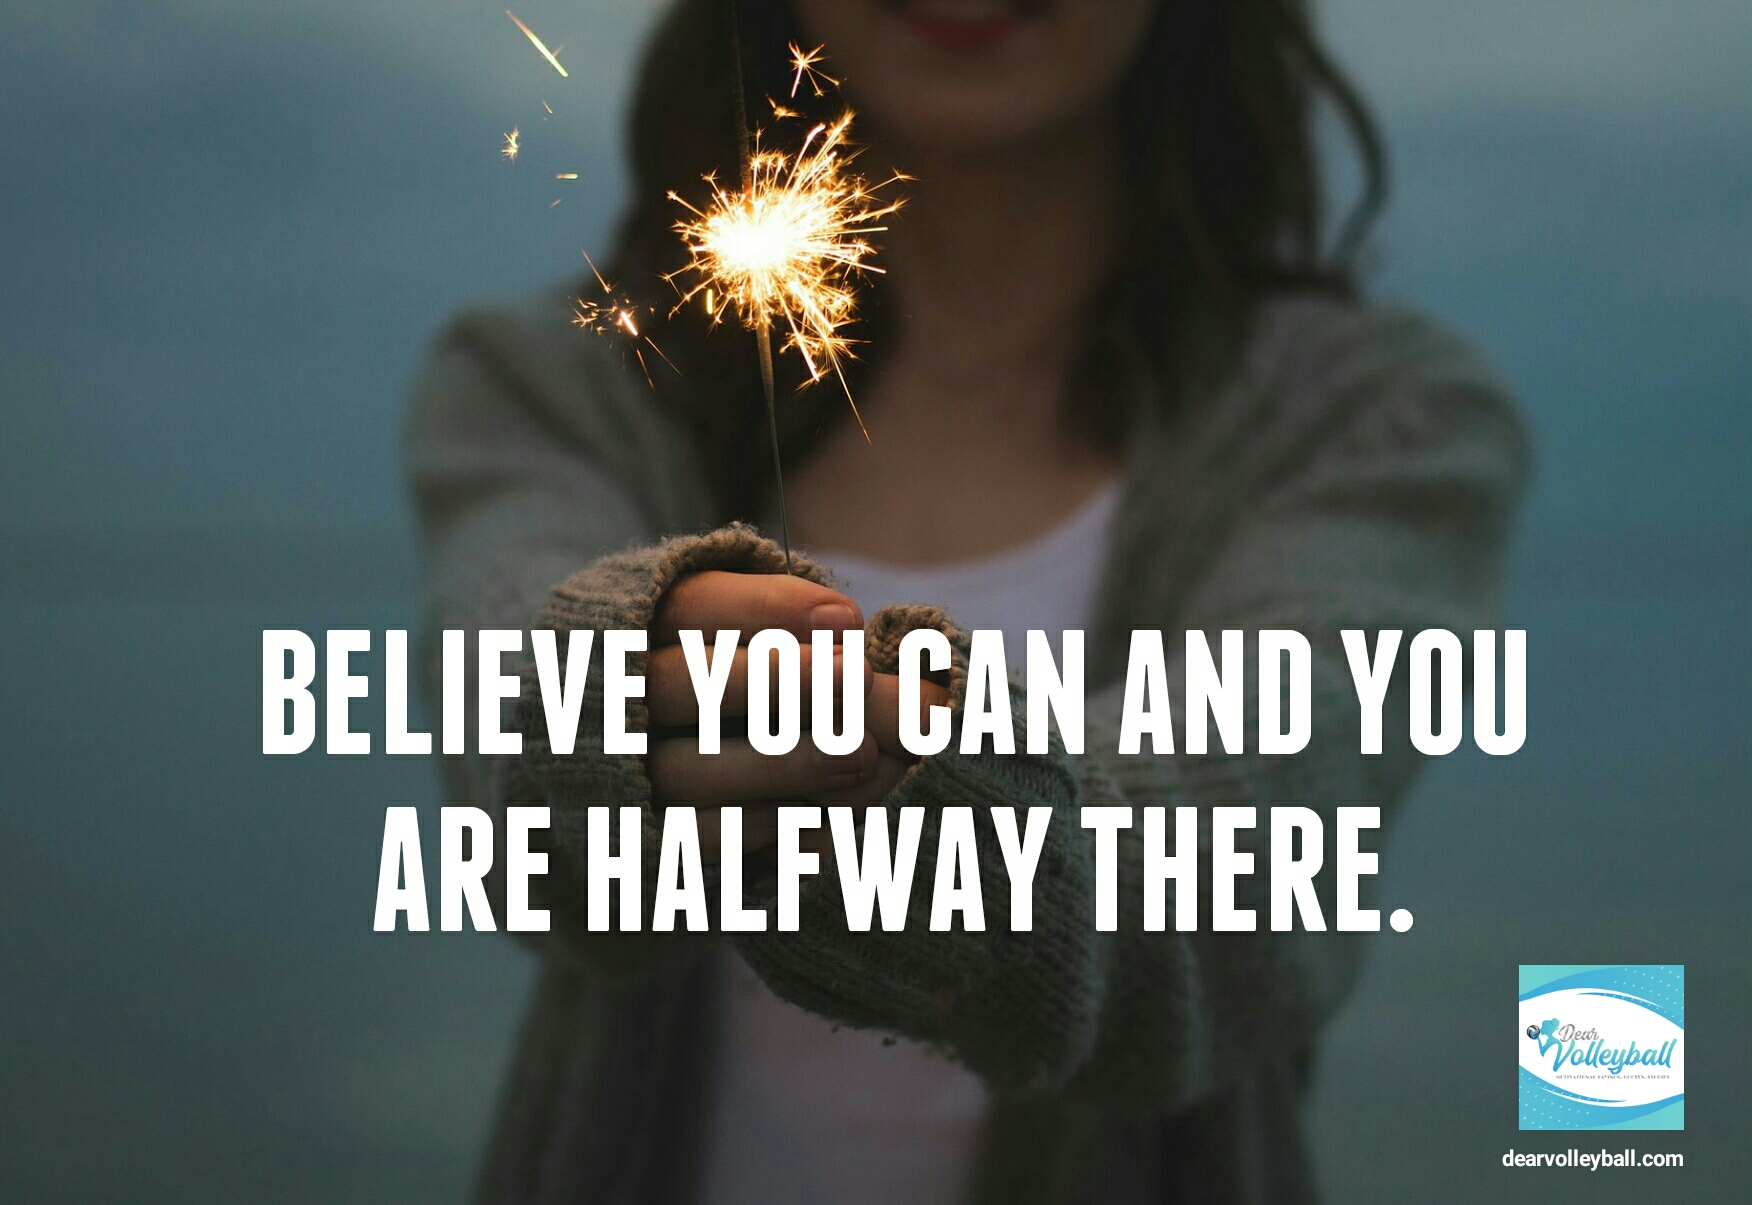 "Believe you can and you are halfway there." and other strong girls pictures paired with an inspirational volleyball quote on Dear Volleyball.com.